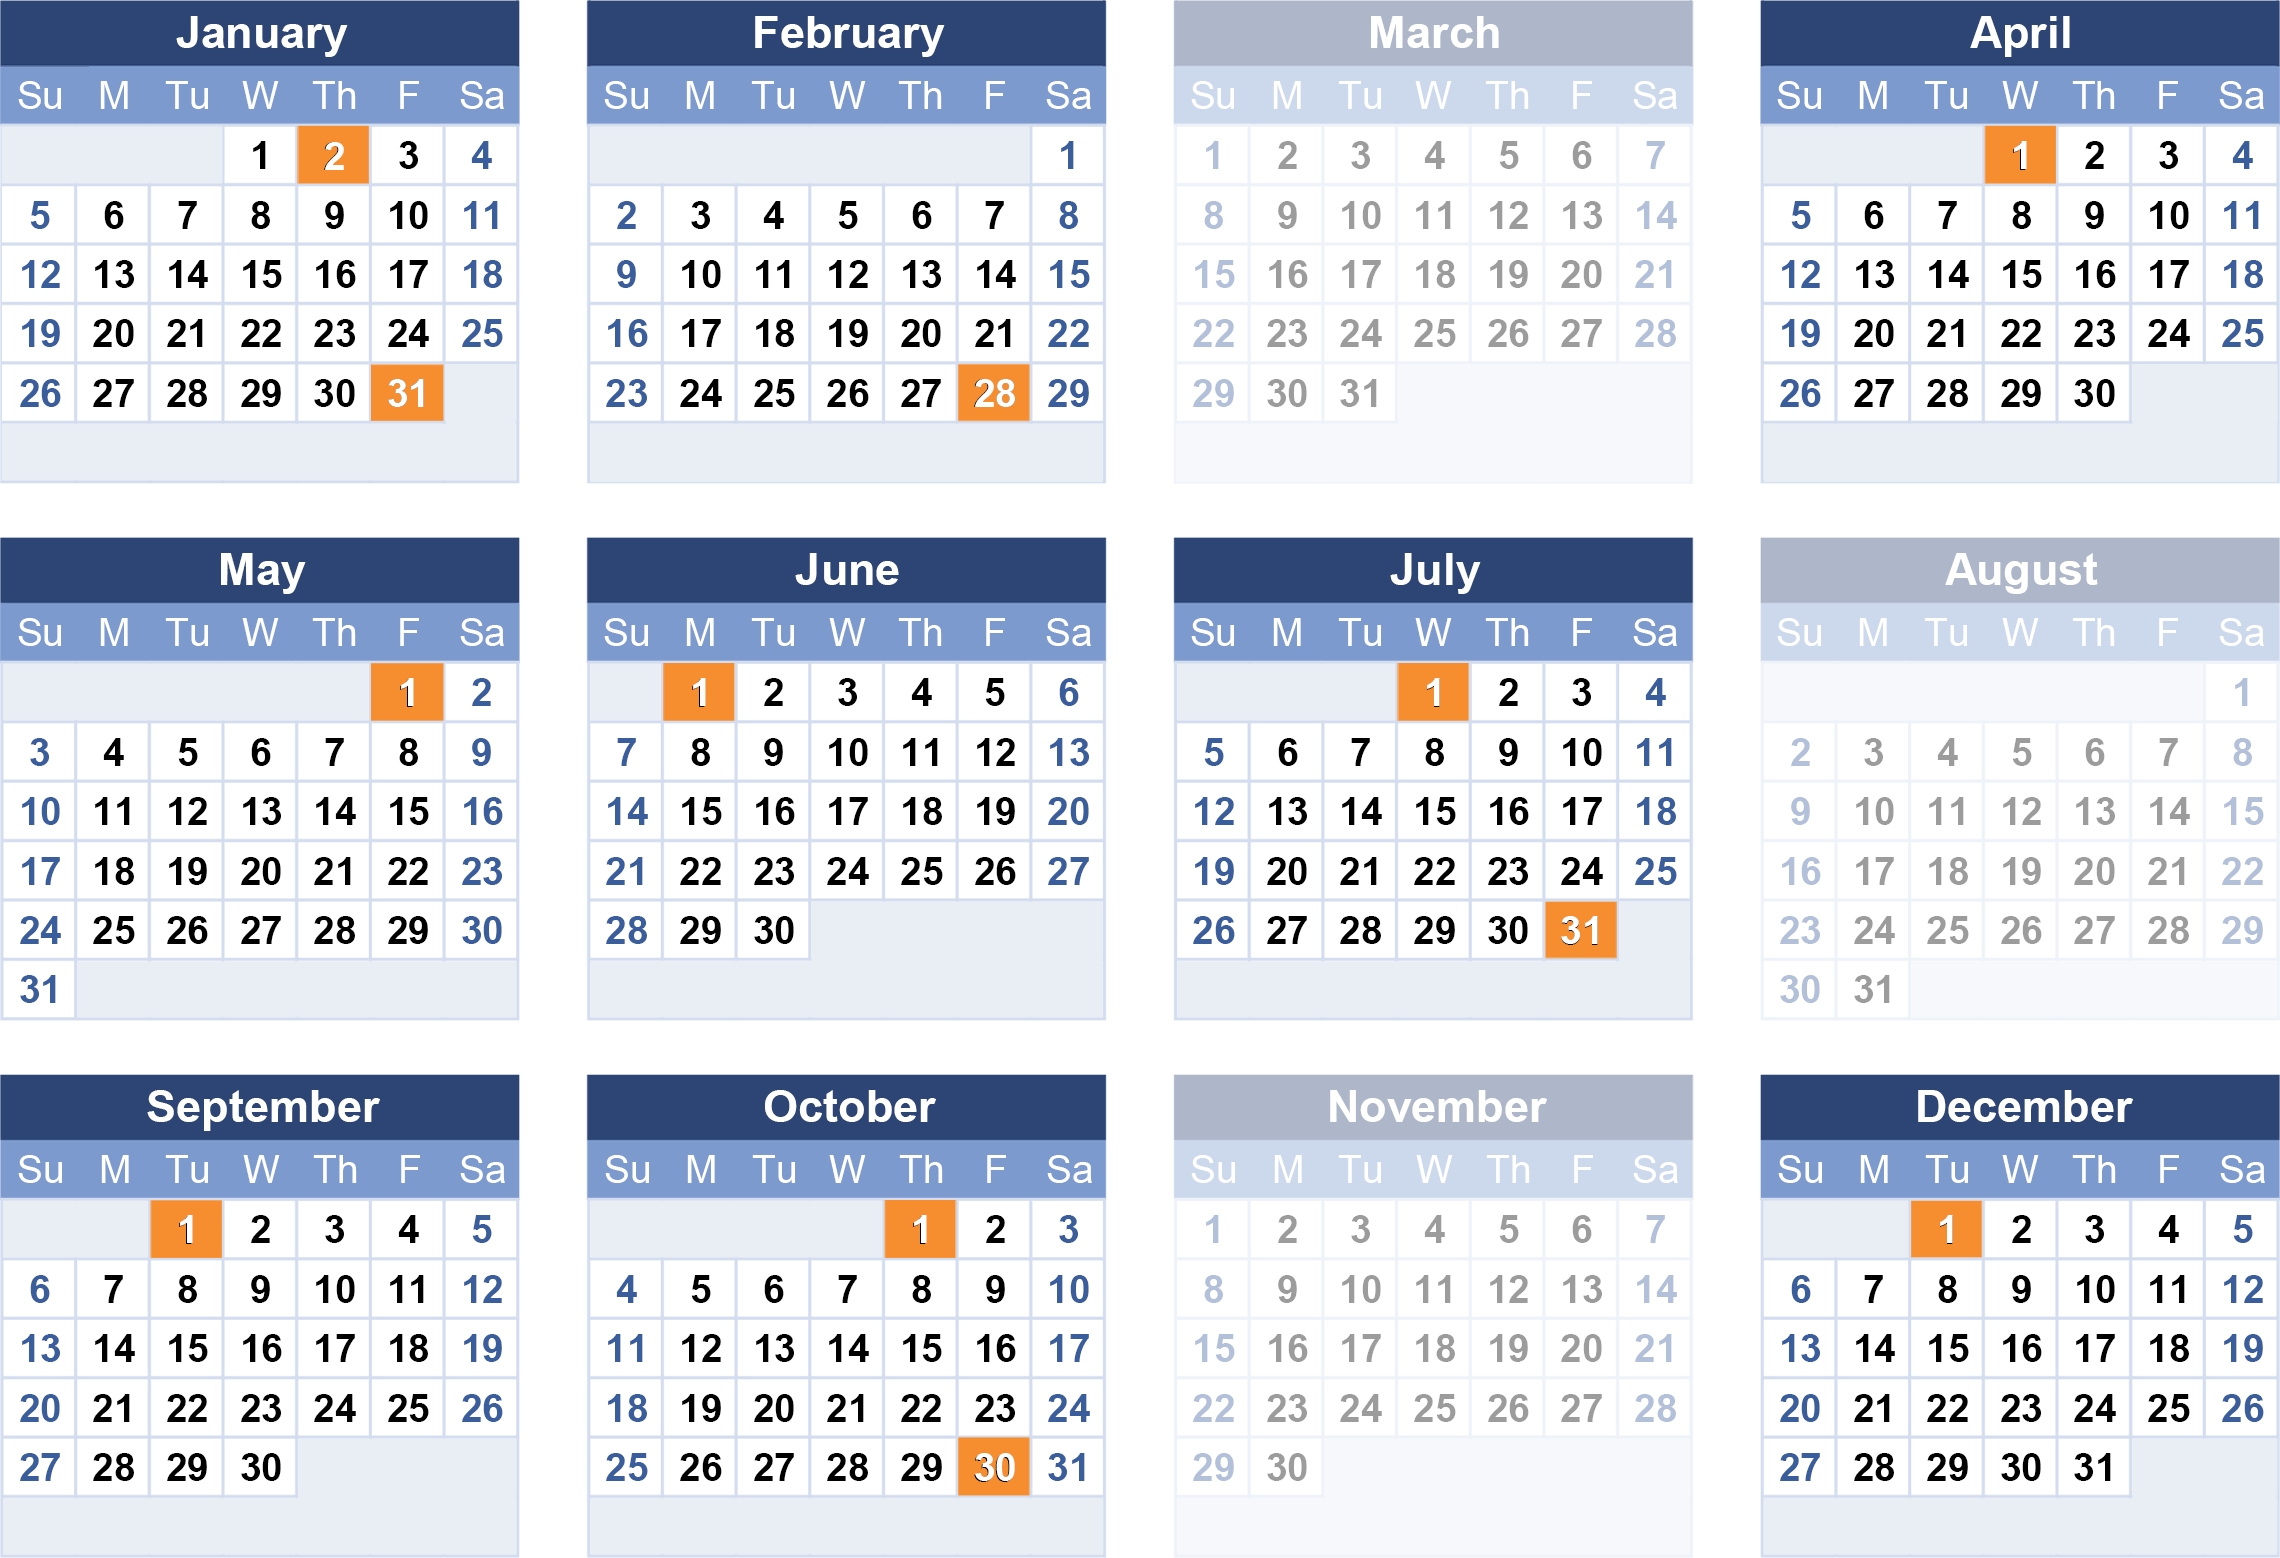 2020 Payroll And Holiday Schedule For State Of Mi Employees Calendar